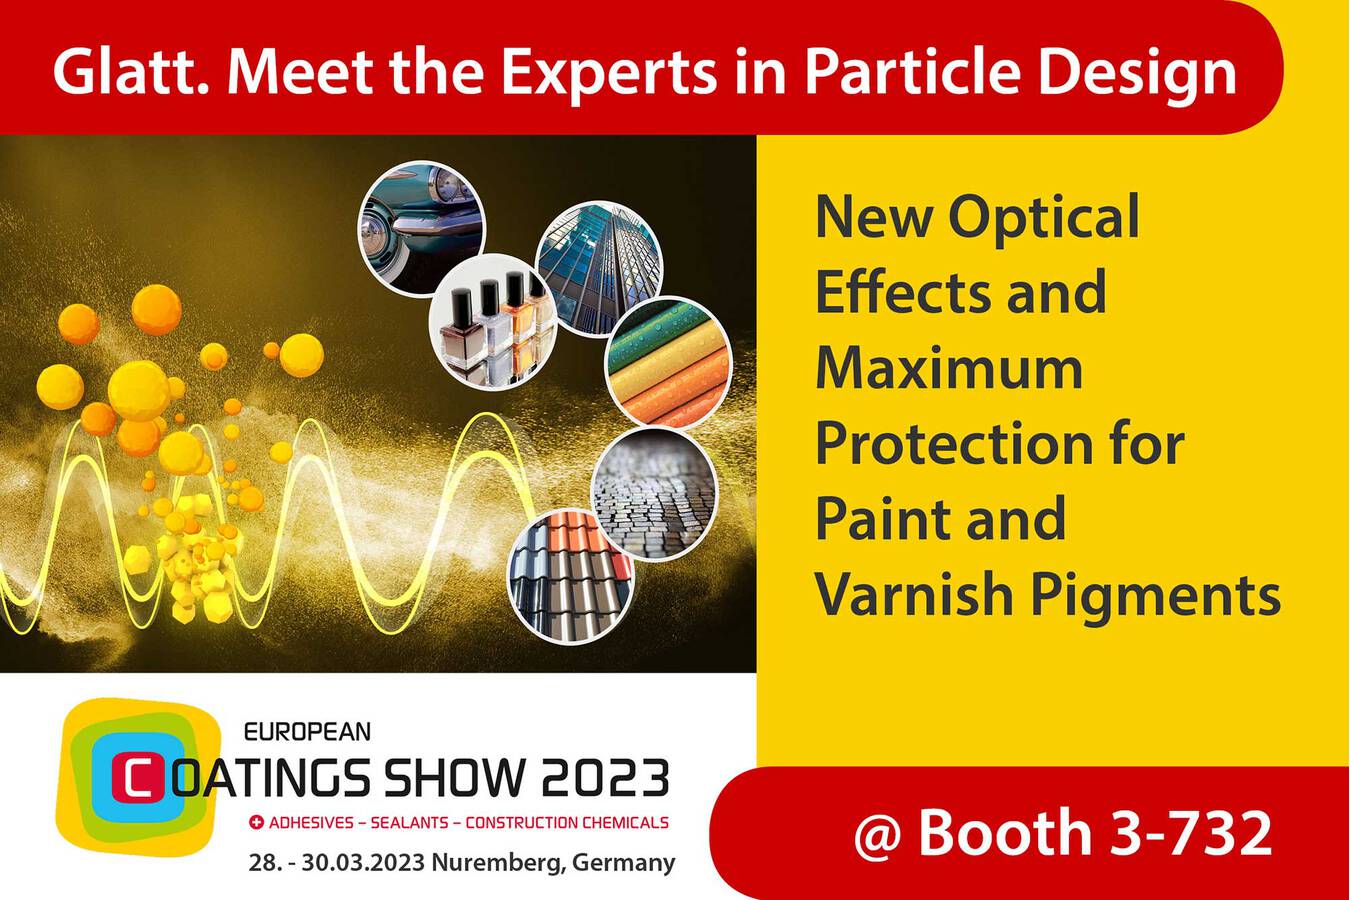 Glatt Particle Design for Additives and Fillers at ECS 2023 Glatt will focus on manufacturing technologies and novel powder materials for paints, coatings and construction chemicals.